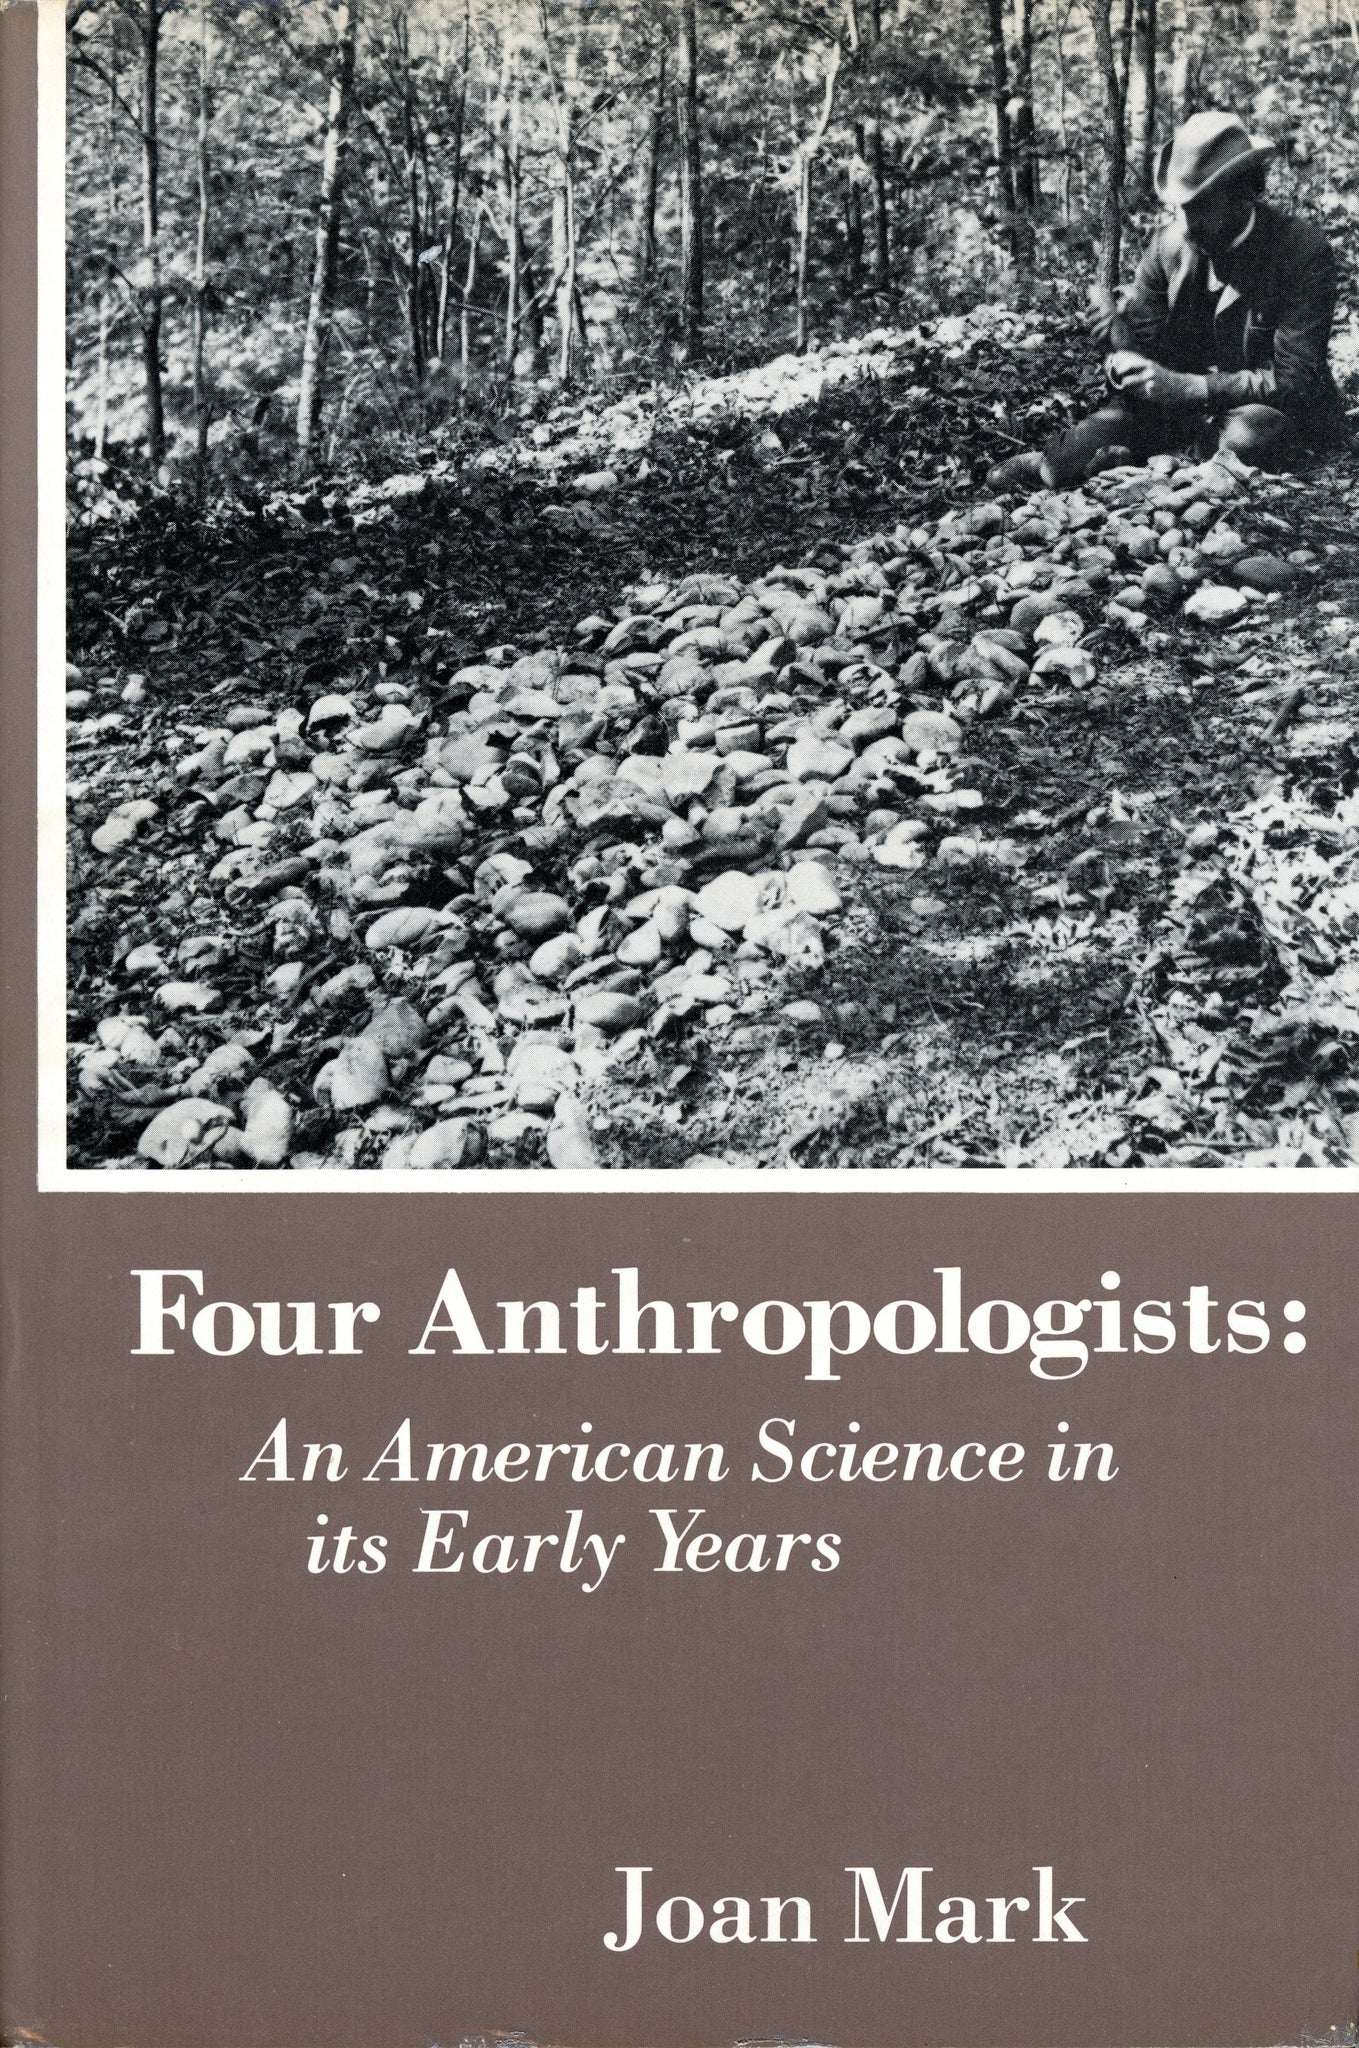 Four Anthropologists: An American Science in Its Early Years